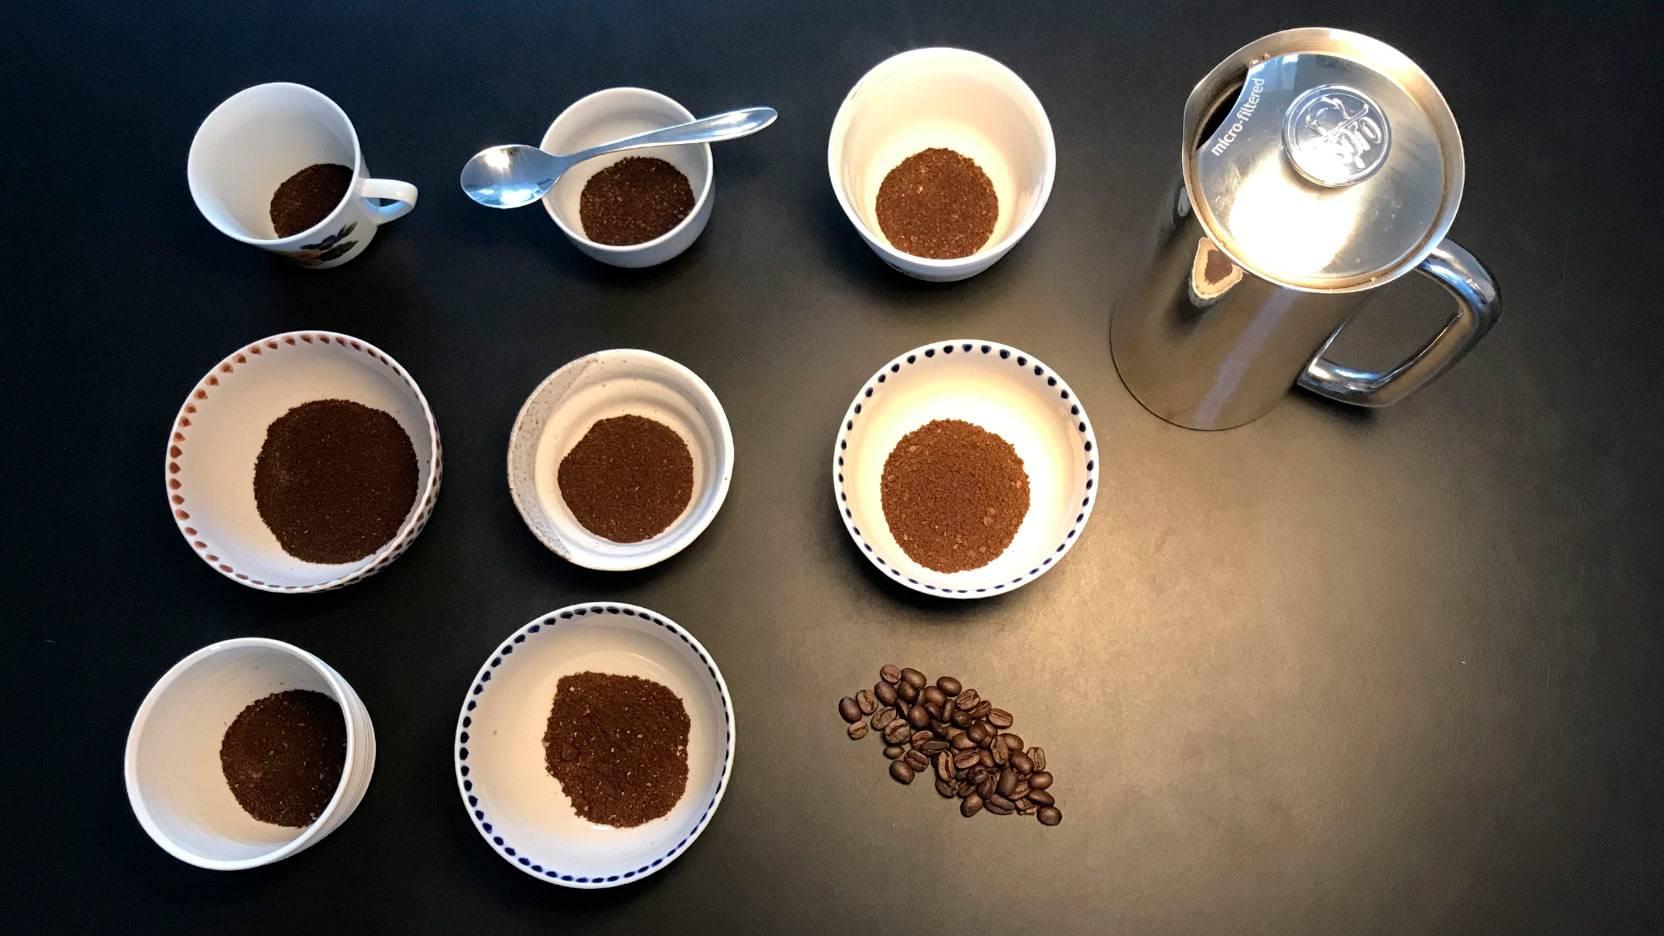 Image from the test of coffee grinders showing freshly ground coffee from various grinders and settings